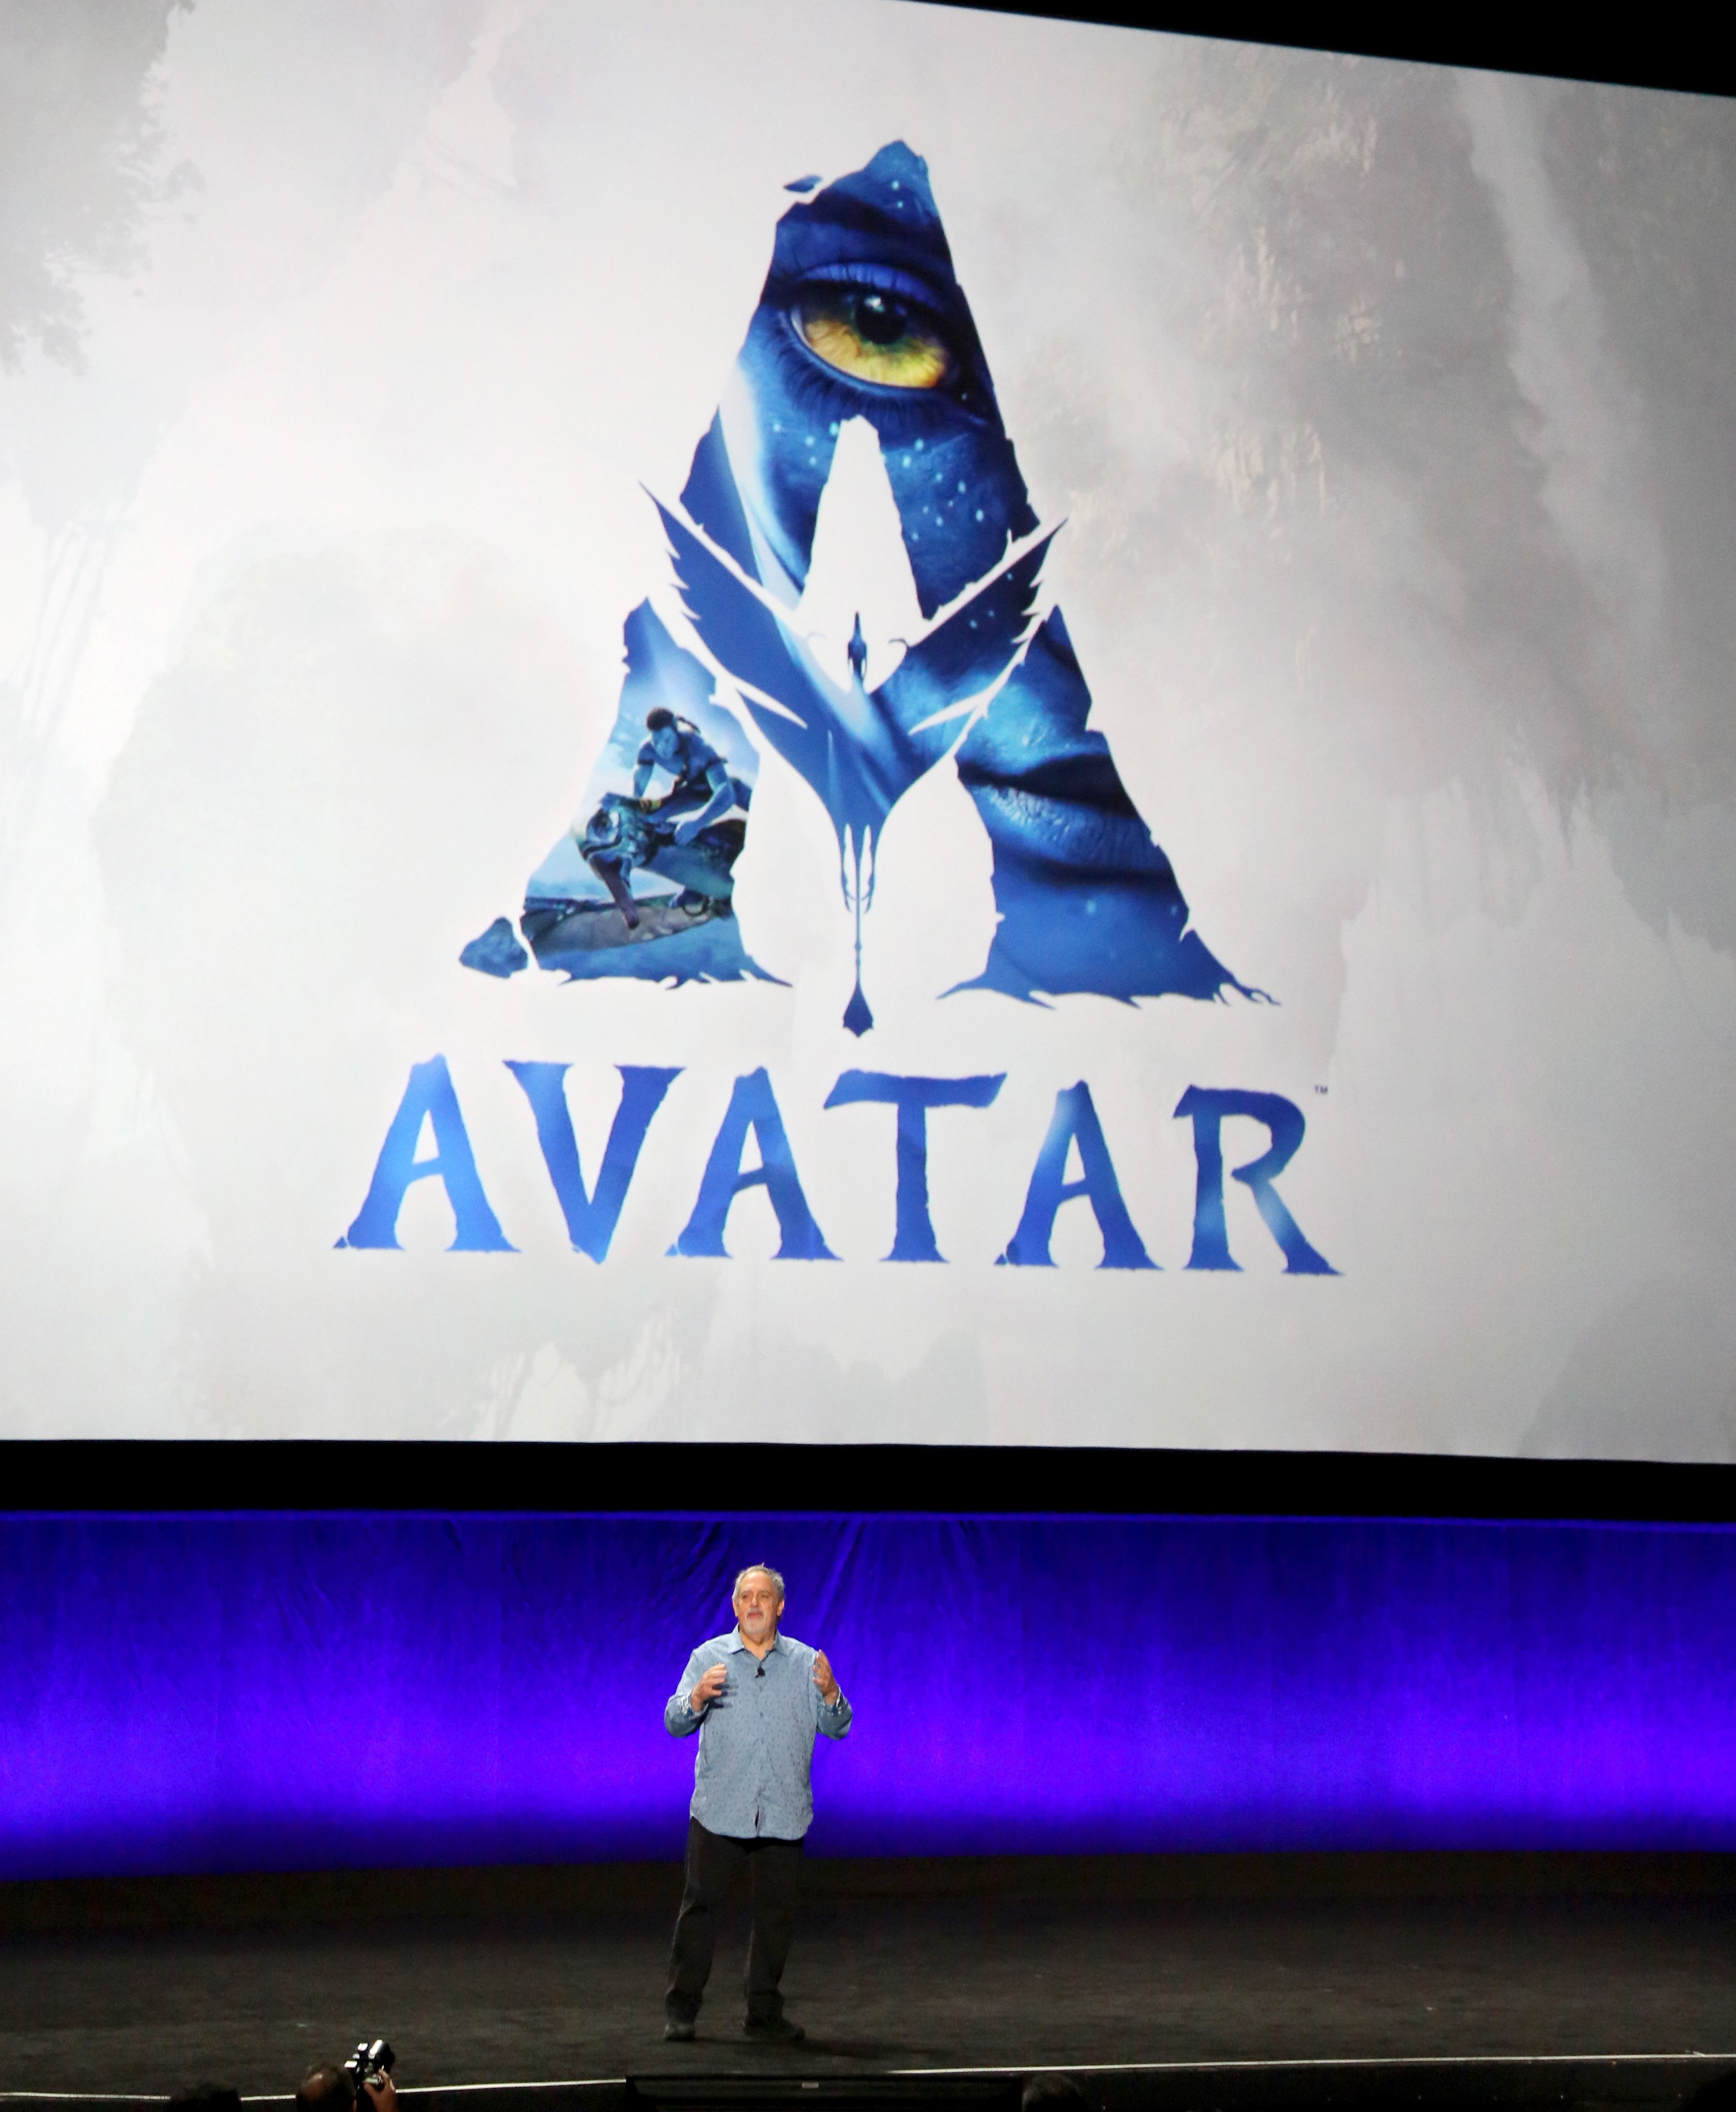 Producer Jon Landau speaking about "Avatar The Way of Water" at CinemaCon 2022 on April 27, 2022 | Source: Getty Images